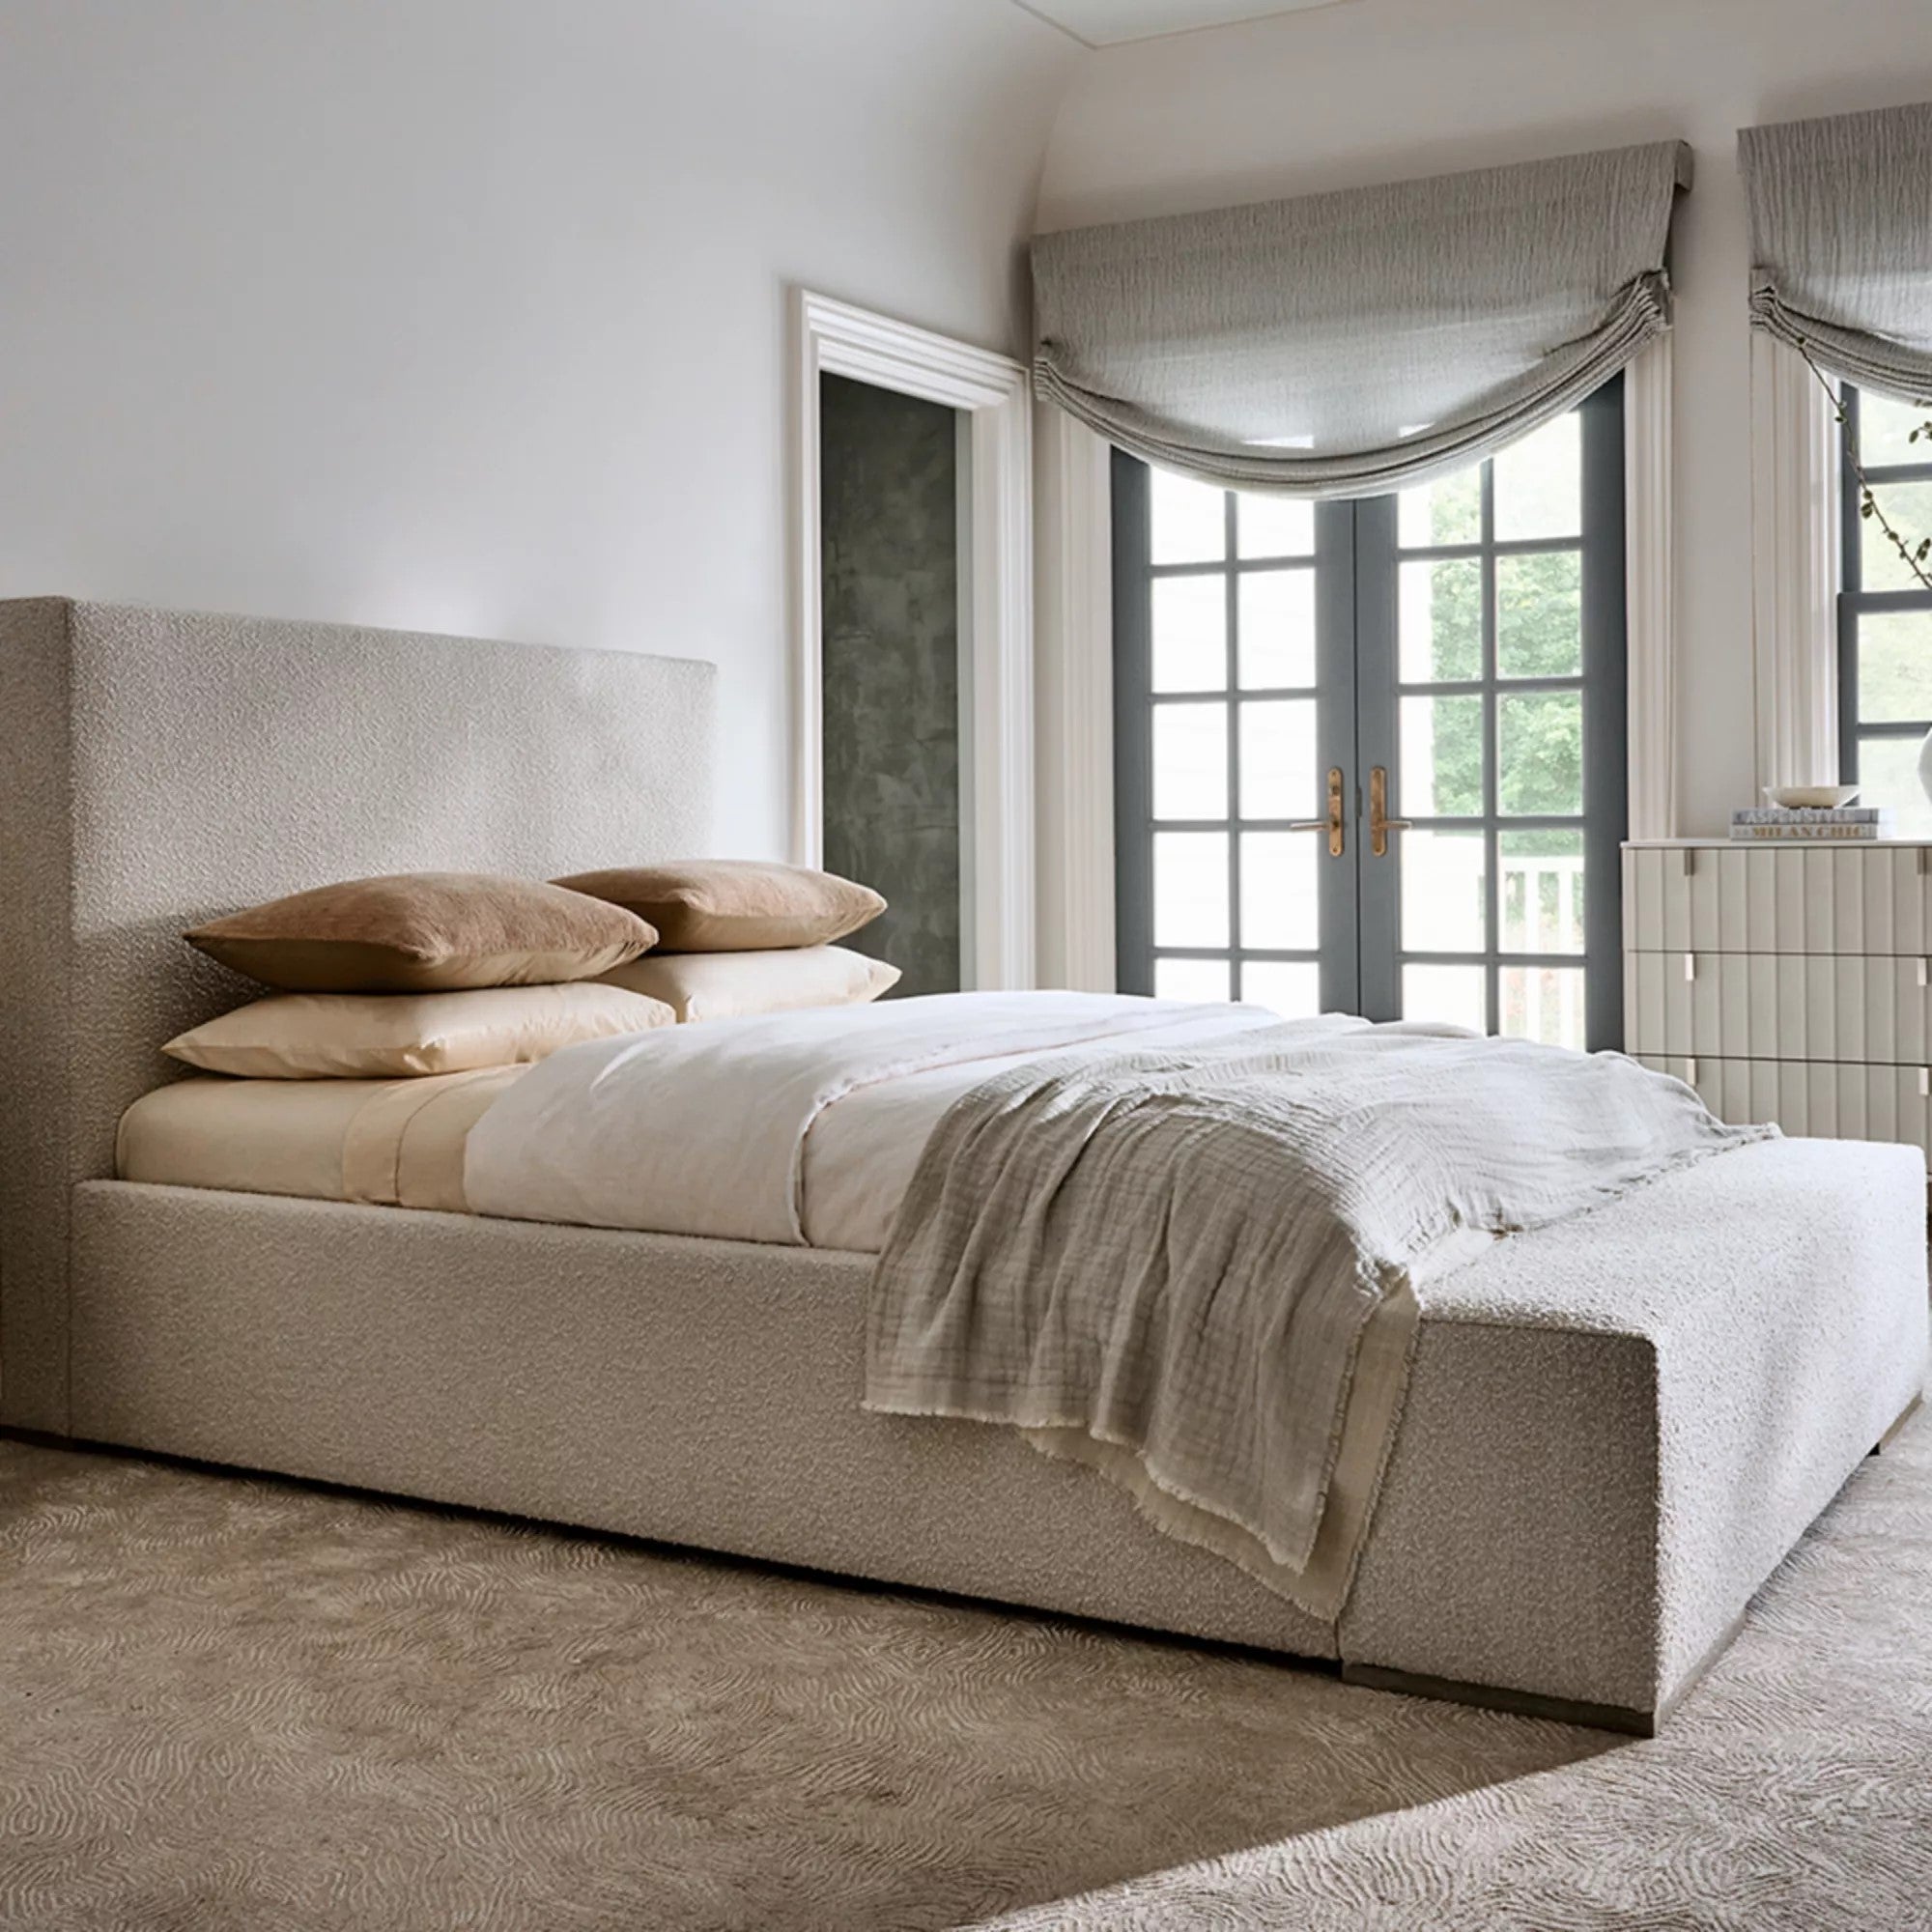 Bernhardt's Dunhill King Bed